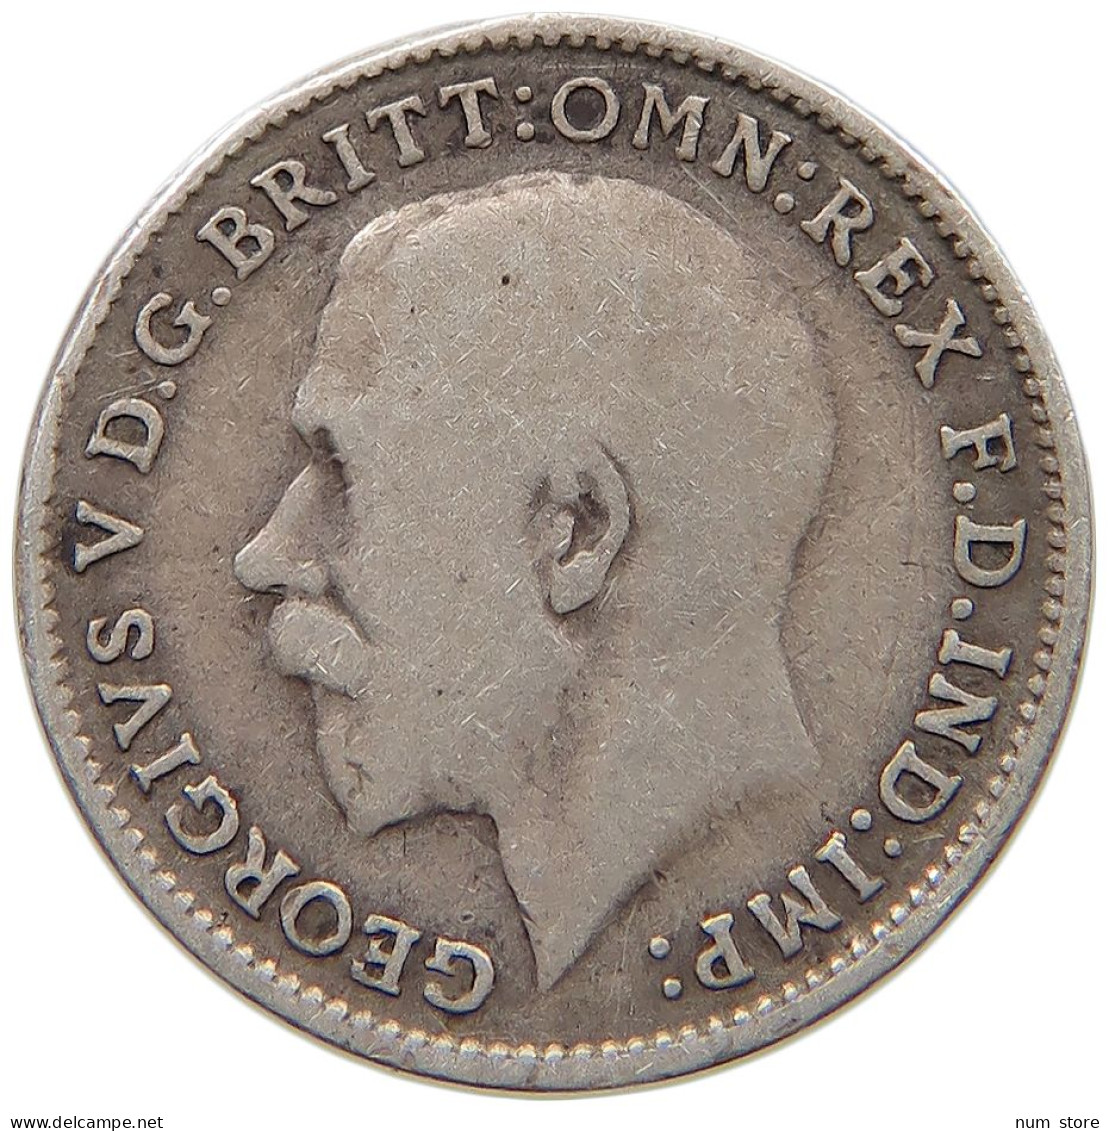 GREAT BRITAIN THREEPENCE 1915 #s059 0597 - F. 3 Pence